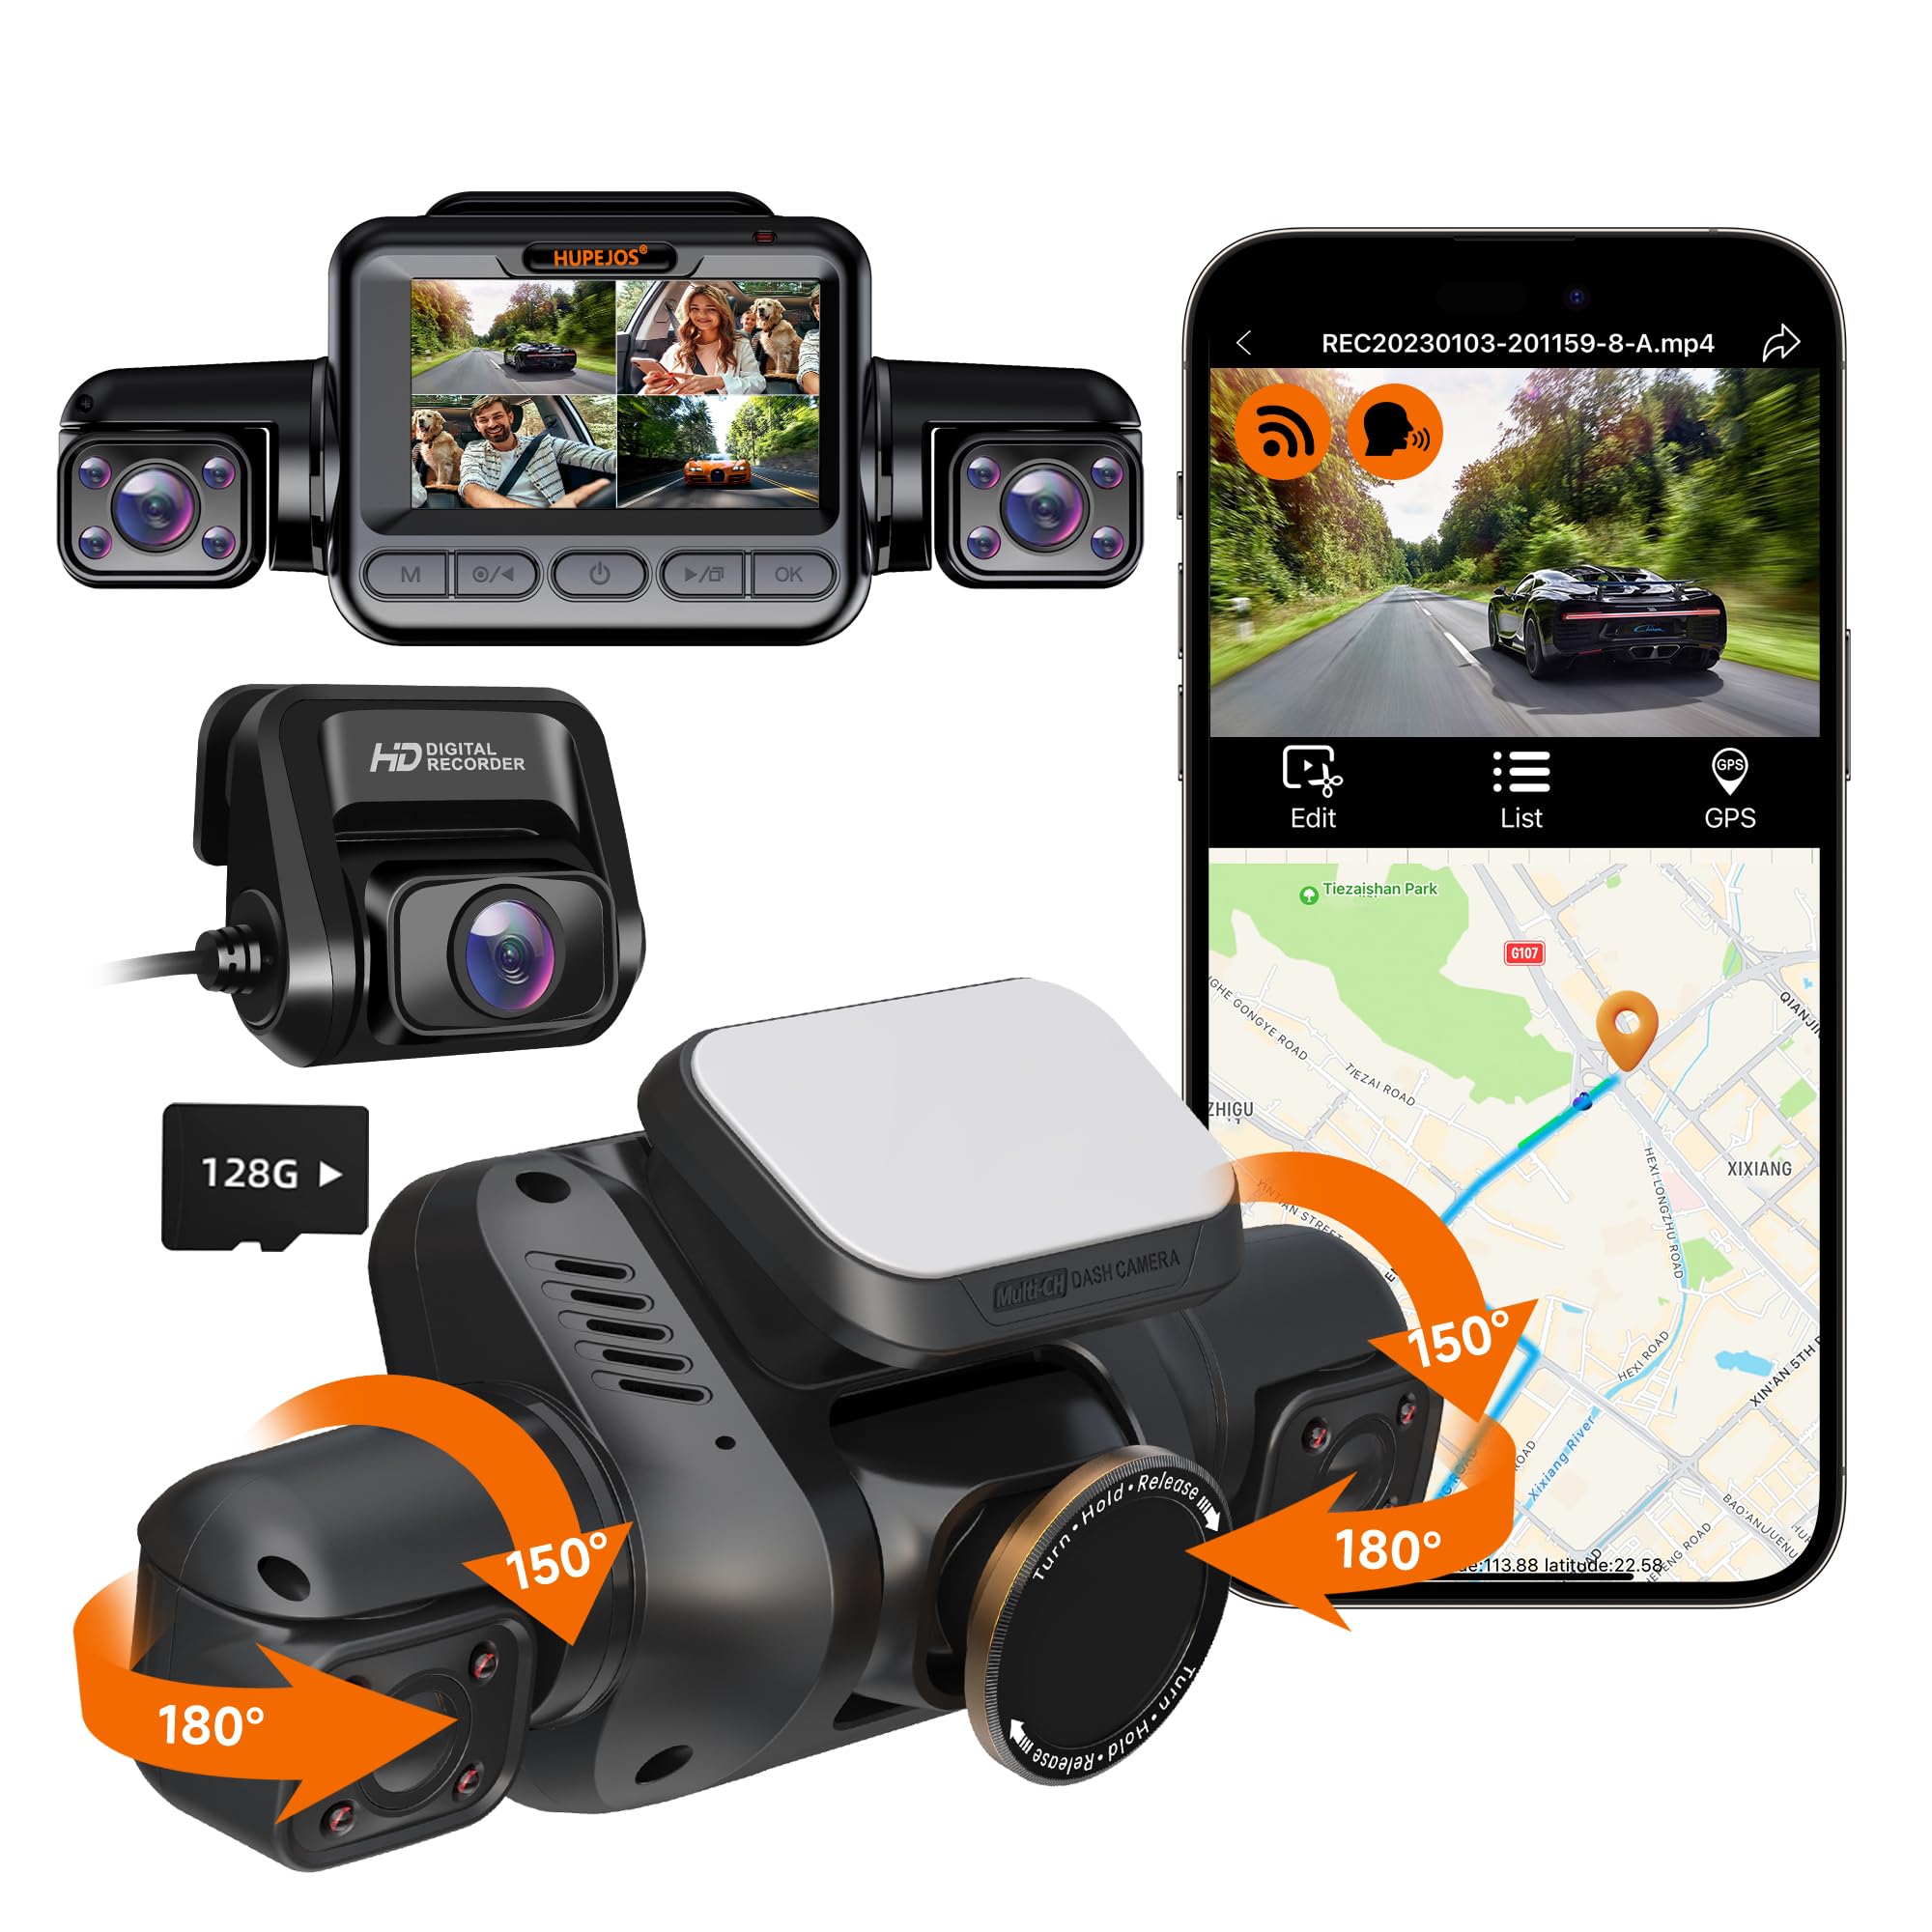 Hupejos 360° 4 Channel Dash Cam, 4K Front+1080P*2 Left Right, 3K Front +1080Px3, Built in GPS 5GHz WiFi, Voice Control, Super Night Vision, CPL Filter, Free 128GB Card, 24 Hours Parking Mode,V8-Plus